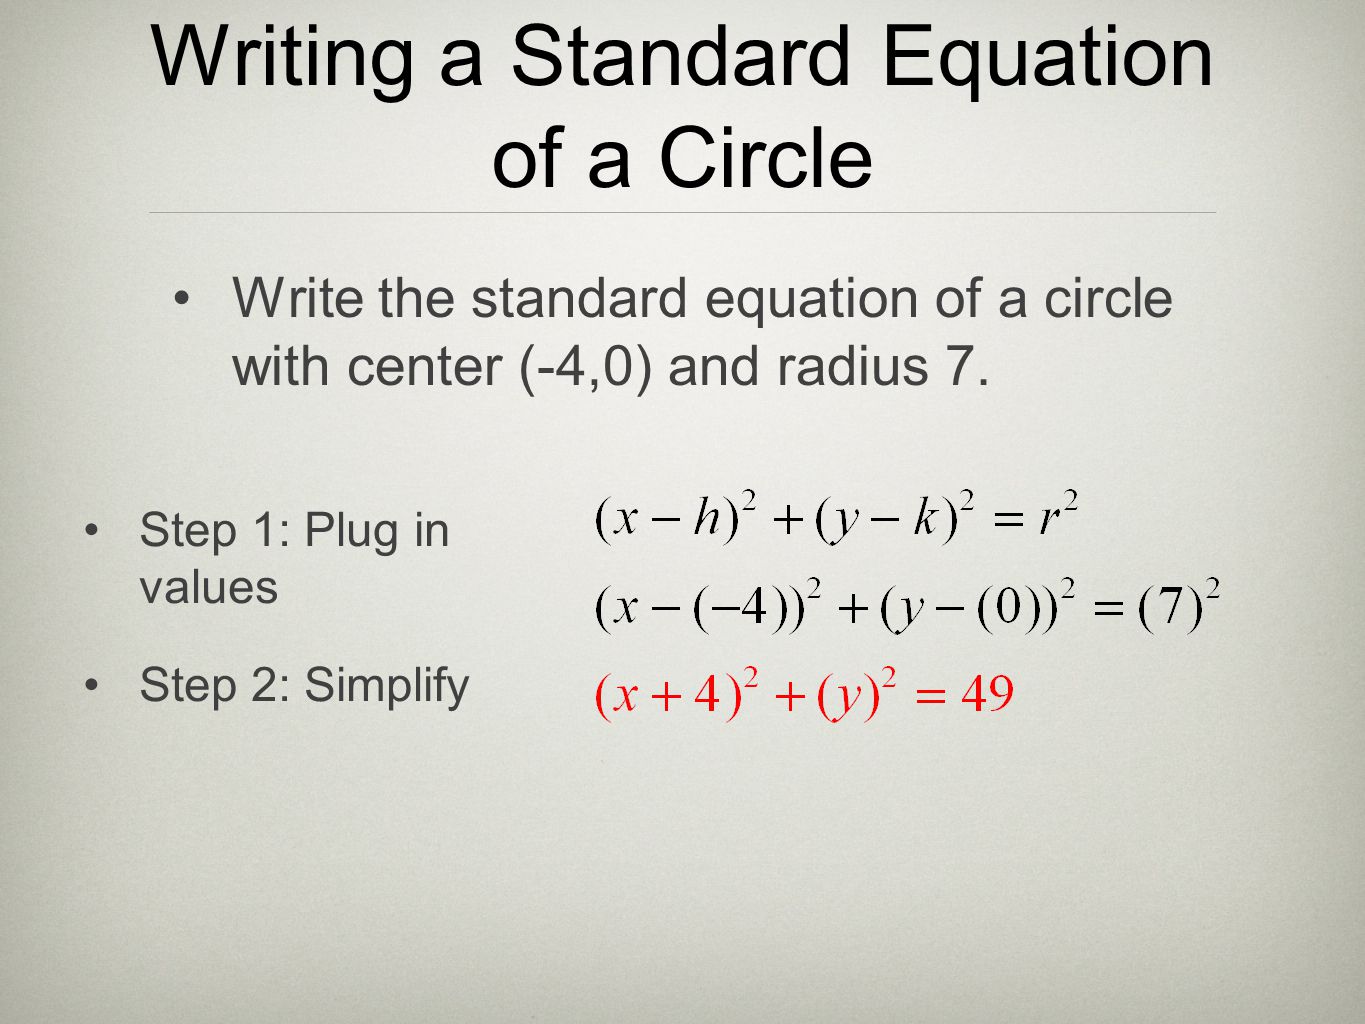 Writing a Standard Equation of a Circle